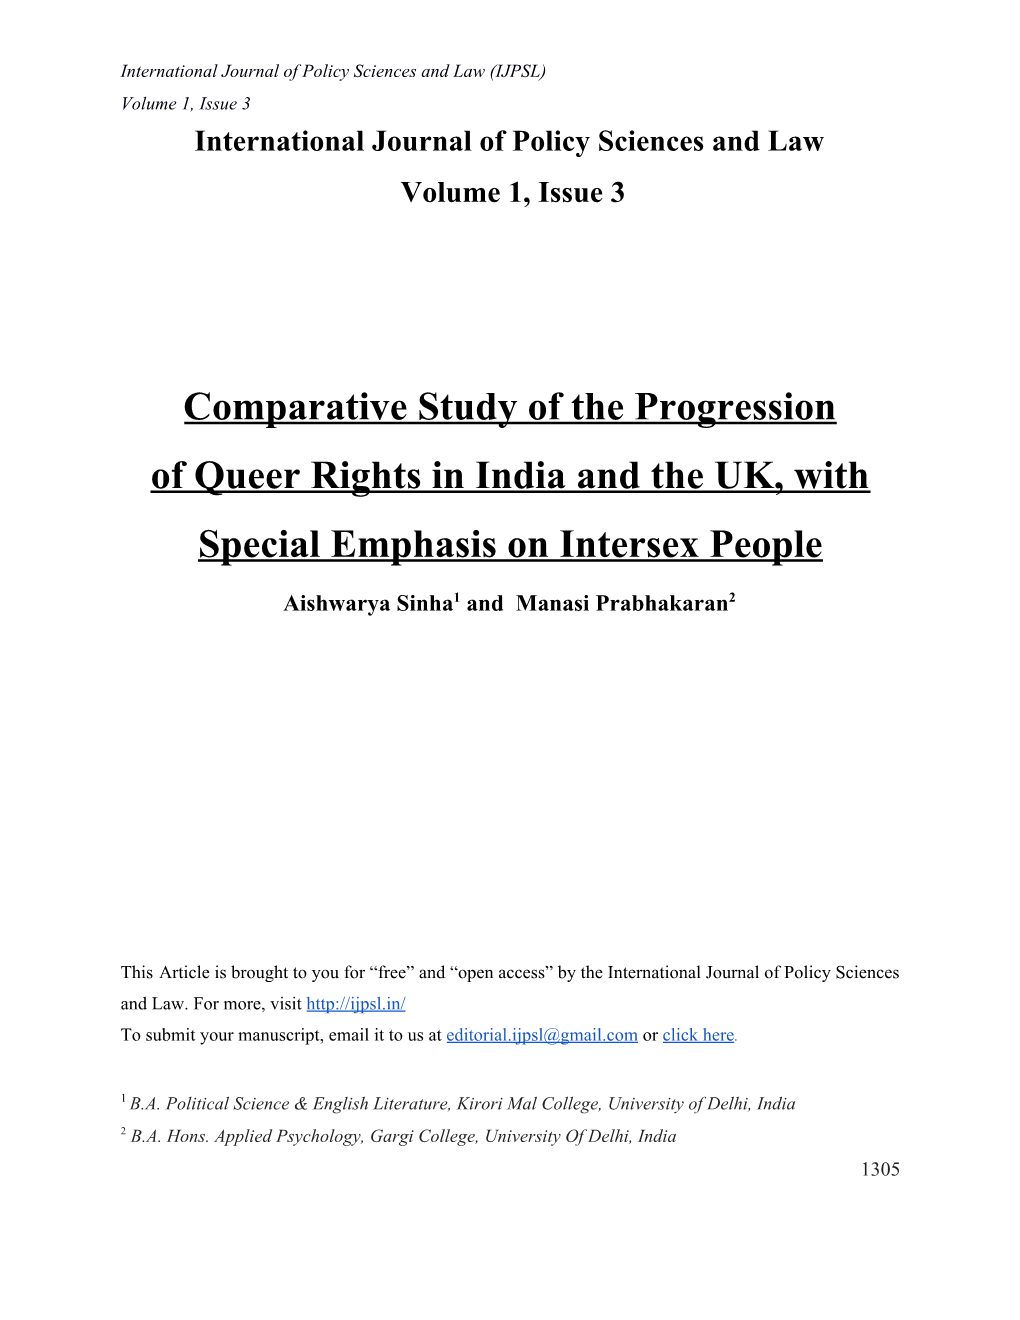 Comparative Study of the Progression of Queer Rights in India and the UK, with Special Emphasis on Intersex People